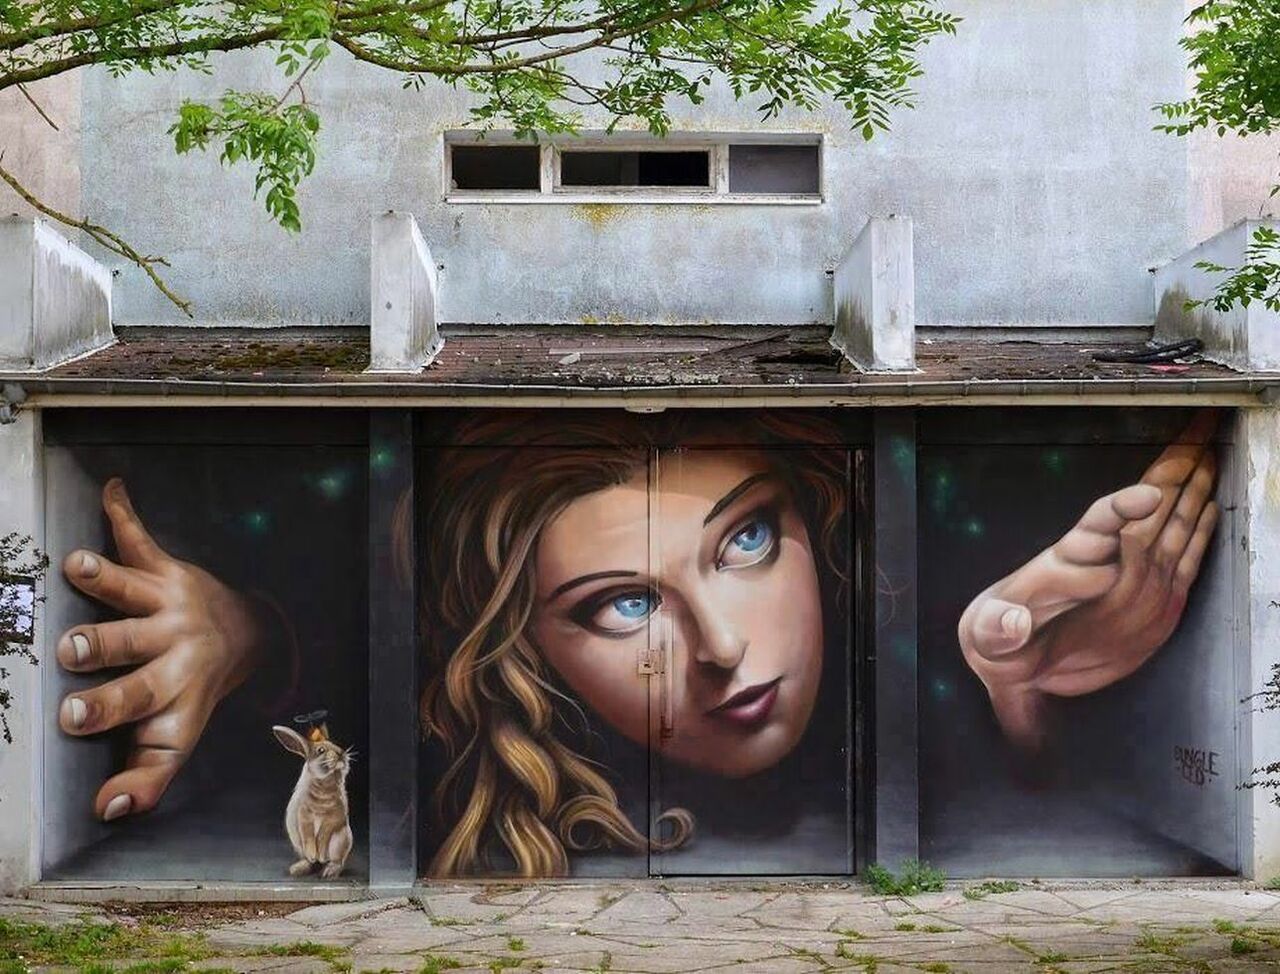 #StreetArtSaturday #3D #Streetart of a blue eyed girl and a rabbit (Alice?) by Bingle. https://t.co/mUhc8Q5fH2